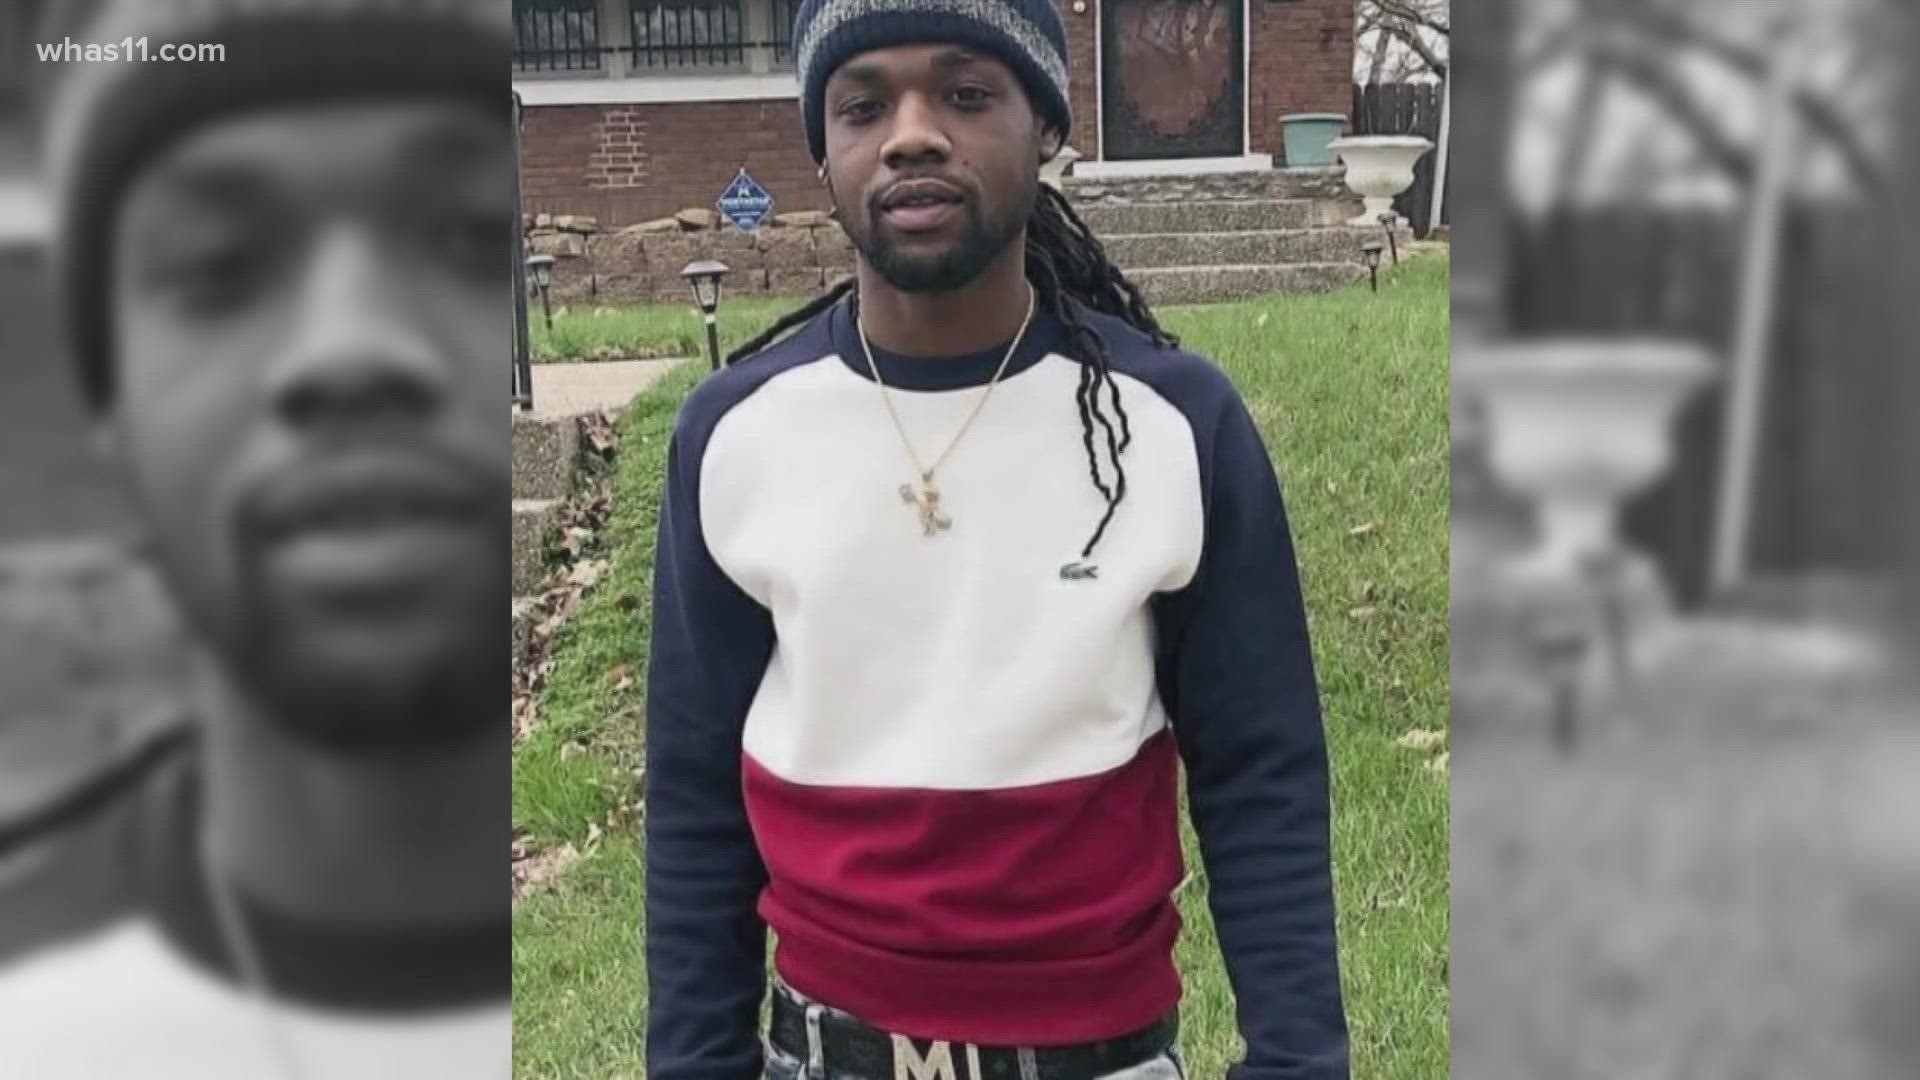 The body of Jermaine Sprewer, the 25-year-old man Louisville police said was kidnapped for ransom, was found at Shawnee Park.